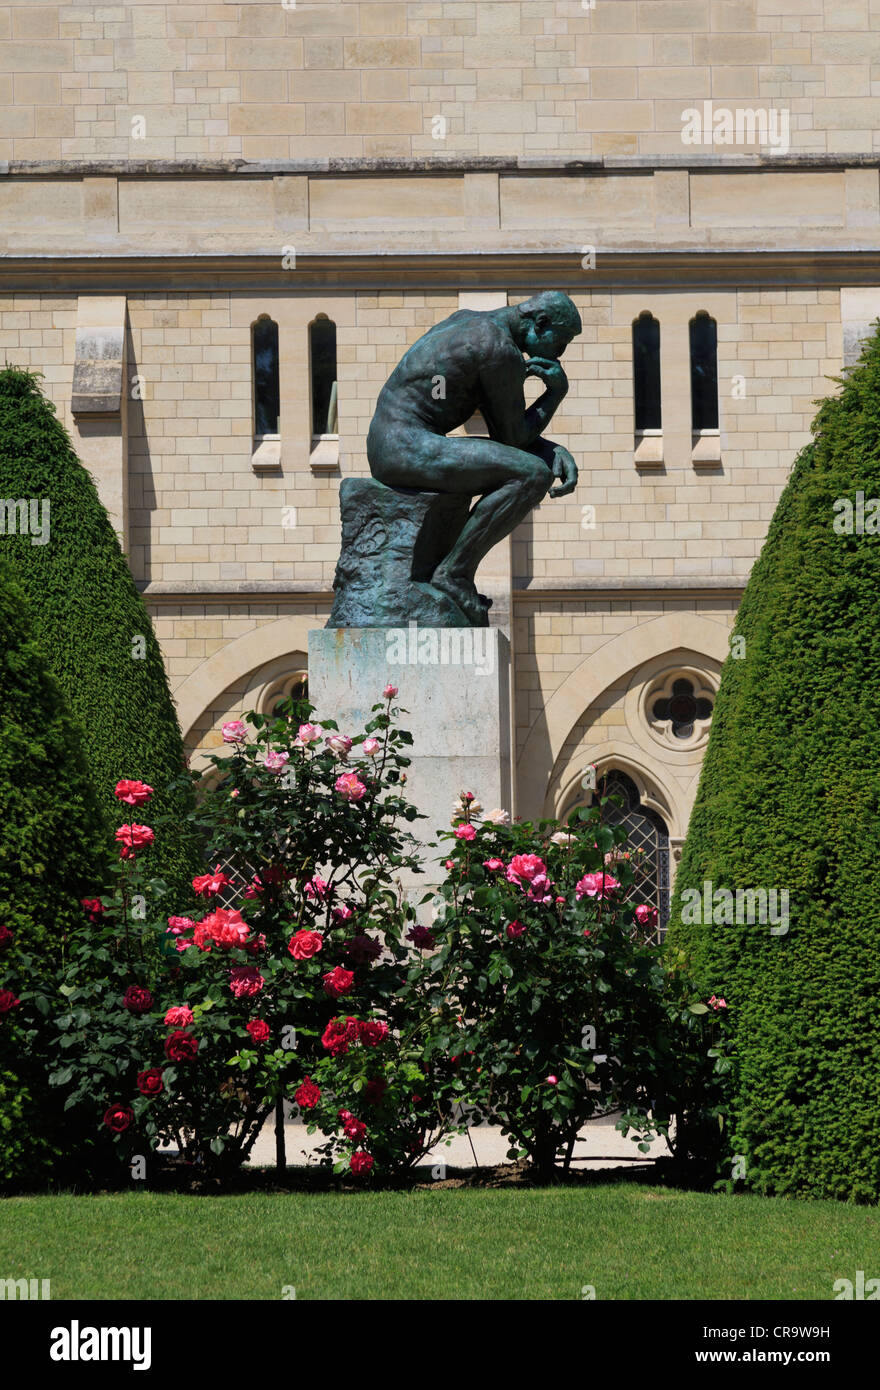 Bronze sculpture The Thinker by Auguste Rodin. Famous statue in the gardens of the Musee Rodin, Paris. Stock Photo